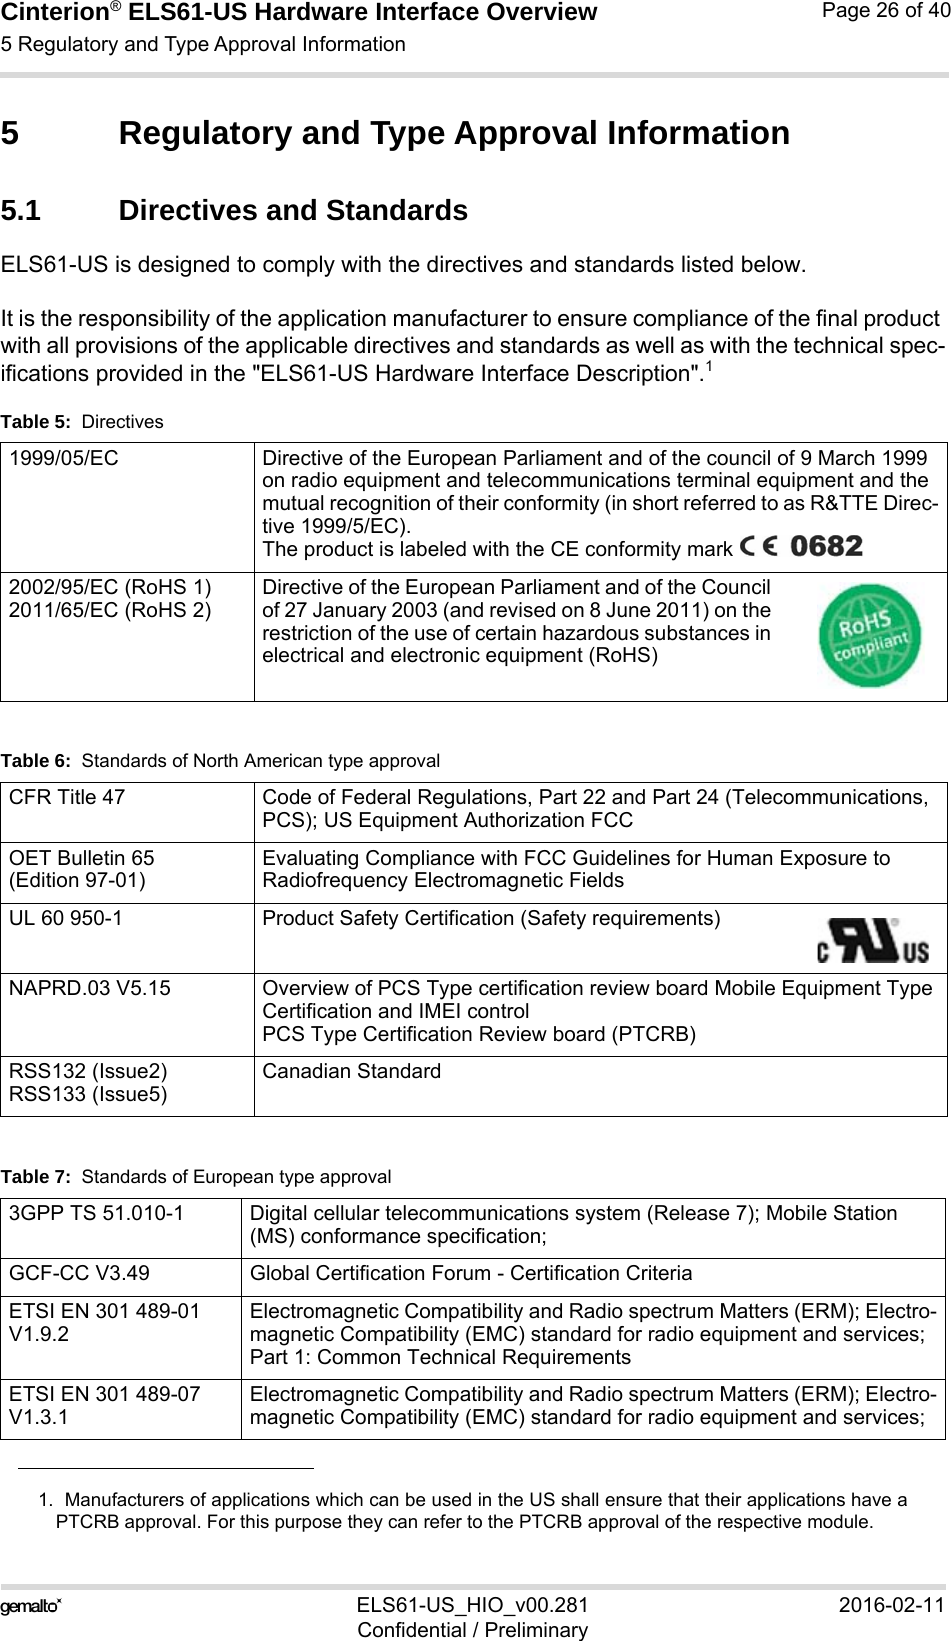 Cinterion® ELS61-US Hardware Interface Overview5 Regulatory and Type Approval Information32ELS61-US_HIO_v00.281 2016-02-11Confidential / PreliminaryPage 26 of 405 Regulatory and Type Approval Information5.1 Directives and StandardsELS61-US is designed to comply with the directives and standards listed below.It is the responsibility of the application manufacturer to ensure compliance of the final product with all provisions of the applicable directives and standards as well as with the technical spec-ifications provided in the &quot;ELS61-US Hardware Interface Description&quot;.11.  Manufacturers of applications which can be used in the US shall ensure that their applications have aPTCRB approval. For this purpose they can refer to the PTCRB approval of the respective module. Table 5:  Directives1999/05/EC Directive of the European Parliament and of the council of 9 March 1999 on radio equipment and telecommunications terminal equipment and the mutual recognition of their conformity (in short referred to as R&amp;TTE Direc-tive 1999/5/EC).The product is labeled with the CE conformity mark 2002/95/EC (RoHS 1)2011/65/EC (RoHS 2)Directive of the European Parliament and of the Council of 27 January 2003 (and revised on 8 June 2011) on the restriction of the use of certain hazardous substances in electrical and electronic equipment (RoHS)Table 6:  Standards of North American type approvalCFR Title 47 Code of Federal Regulations, Part 22 and Part 24 (Telecommunications, PCS); US Equipment Authorization FCCOET Bulletin 65 (Edition 97-01) Evaluating Compliance with FCC Guidelines for Human Exposure to Radiofrequency Electromagnetic FieldsUL 60 950-1 Product Safety Certification (Safety requirements)NAPRD.03 V5.15 Overview of PCS Type certification review board Mobile Equipment Type Certification and IMEI controlPCS Type Certification Review board (PTCRB)RSS132 (Issue2)RSS133 (Issue5)Canadian StandardTable 7:  Standards of European type approval3GPP TS 51.010-1 Digital cellular telecommunications system (Release 7); Mobile Station (MS) conformance specification;GCF-CC V3.49 Global Certification Forum - Certification CriteriaETSI EN 301 489-01 V1.9.2Electromagnetic Compatibility and Radio spectrum Matters (ERM); Electro-magnetic Compatibility (EMC) standard for radio equipment and services; Part 1: Common Technical RequirementsETSI EN 301 489-07 V1.3.1Electromagnetic Compatibility and Radio spectrum Matters (ERM); Electro-magnetic Compatibility (EMC) standard for radio equipment and services; 